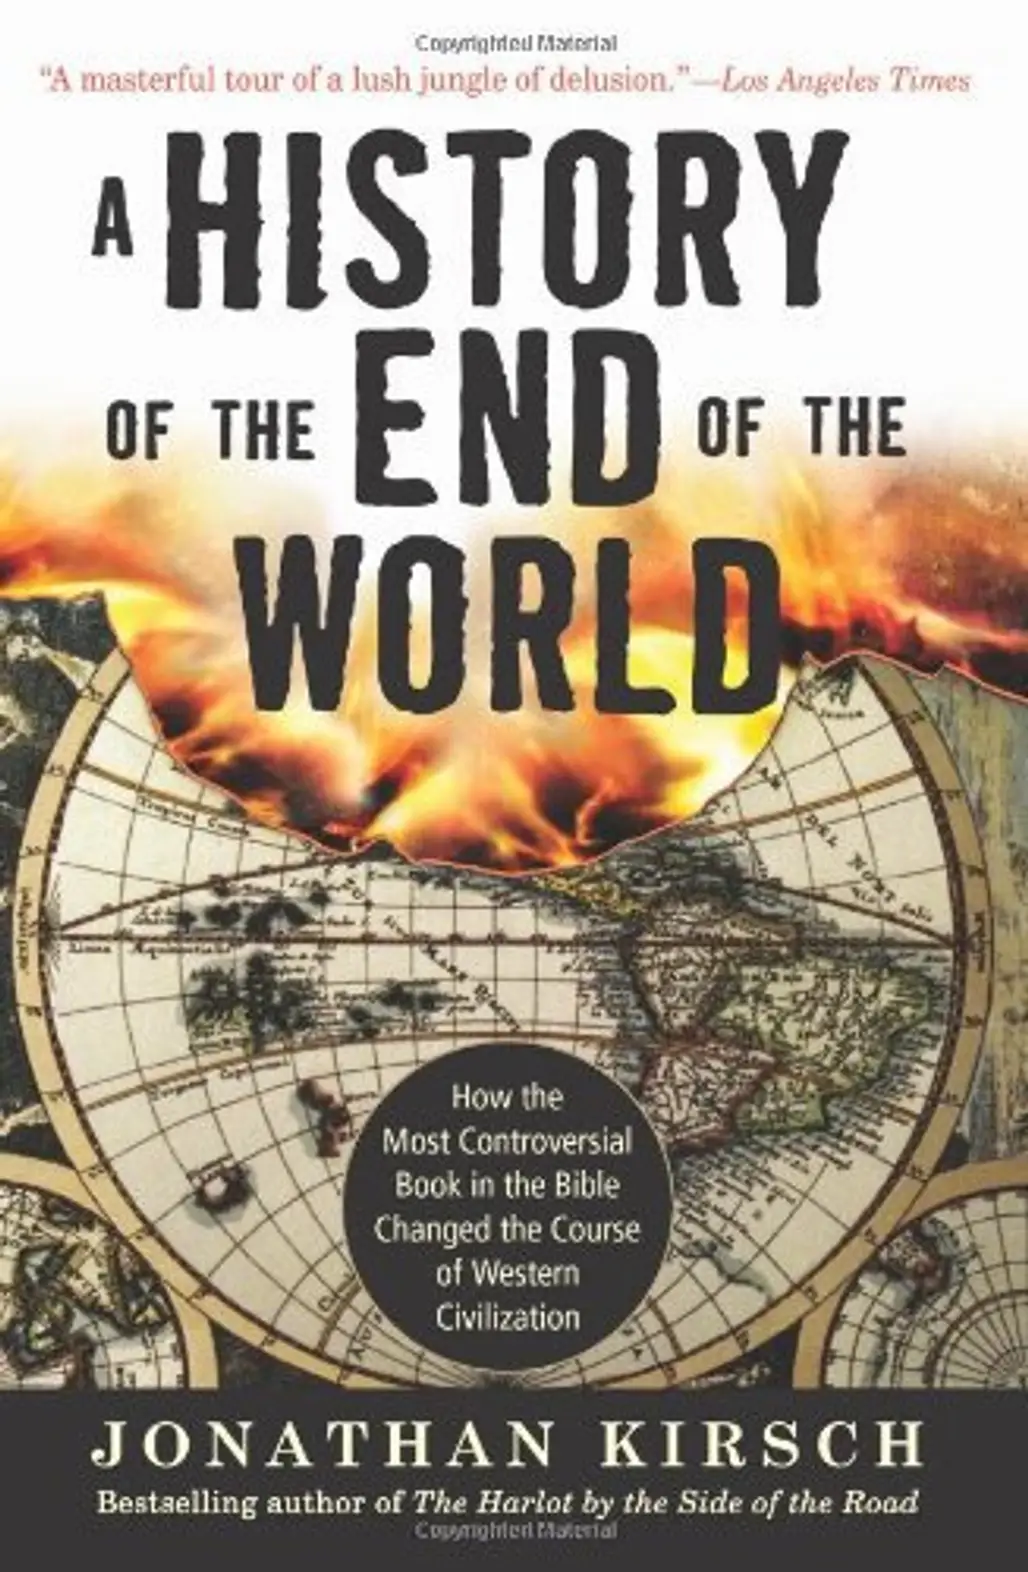 “a History of the End of the World: How the Most Controversial Book in the Bible Changed the Course of Western Civilization” by Jonathan Kirsch